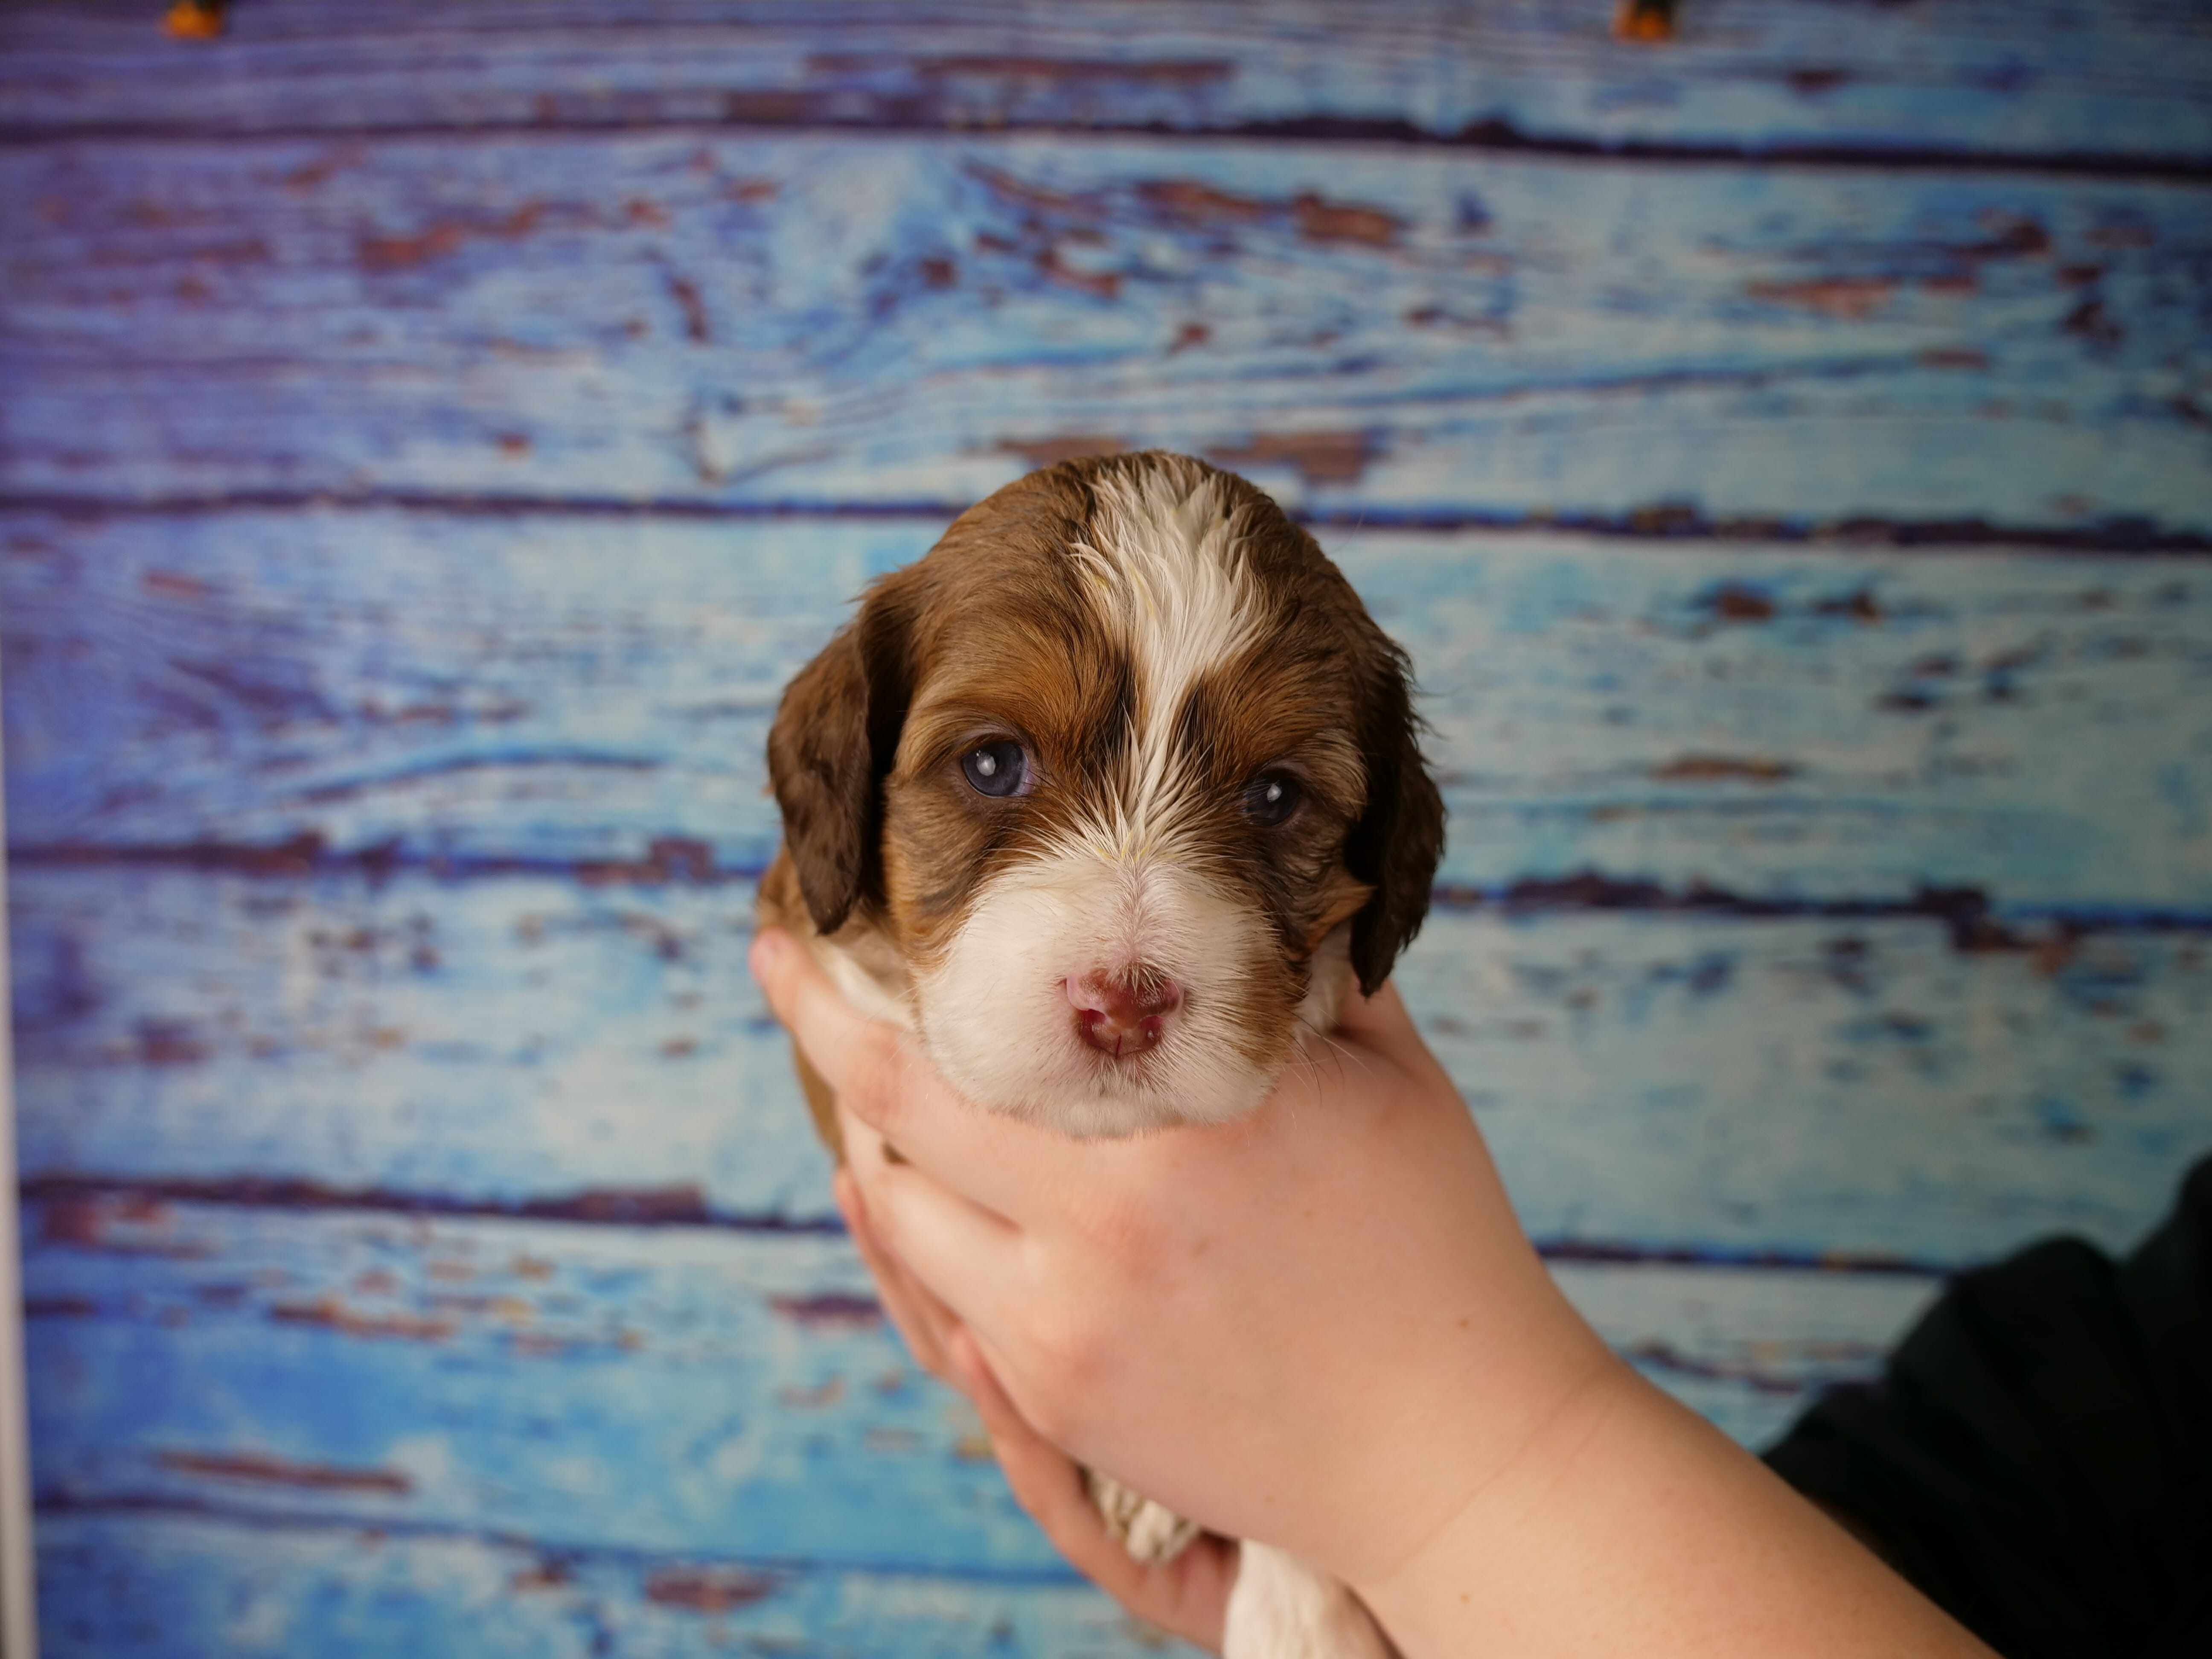 3-week old dilute chocolate phantom puppys face. Puppy is held gently in someones hand against a blue wooden backdrop. Puppy has very light brown patches over both eyes and ears with a white nose and patch on the top of her head.